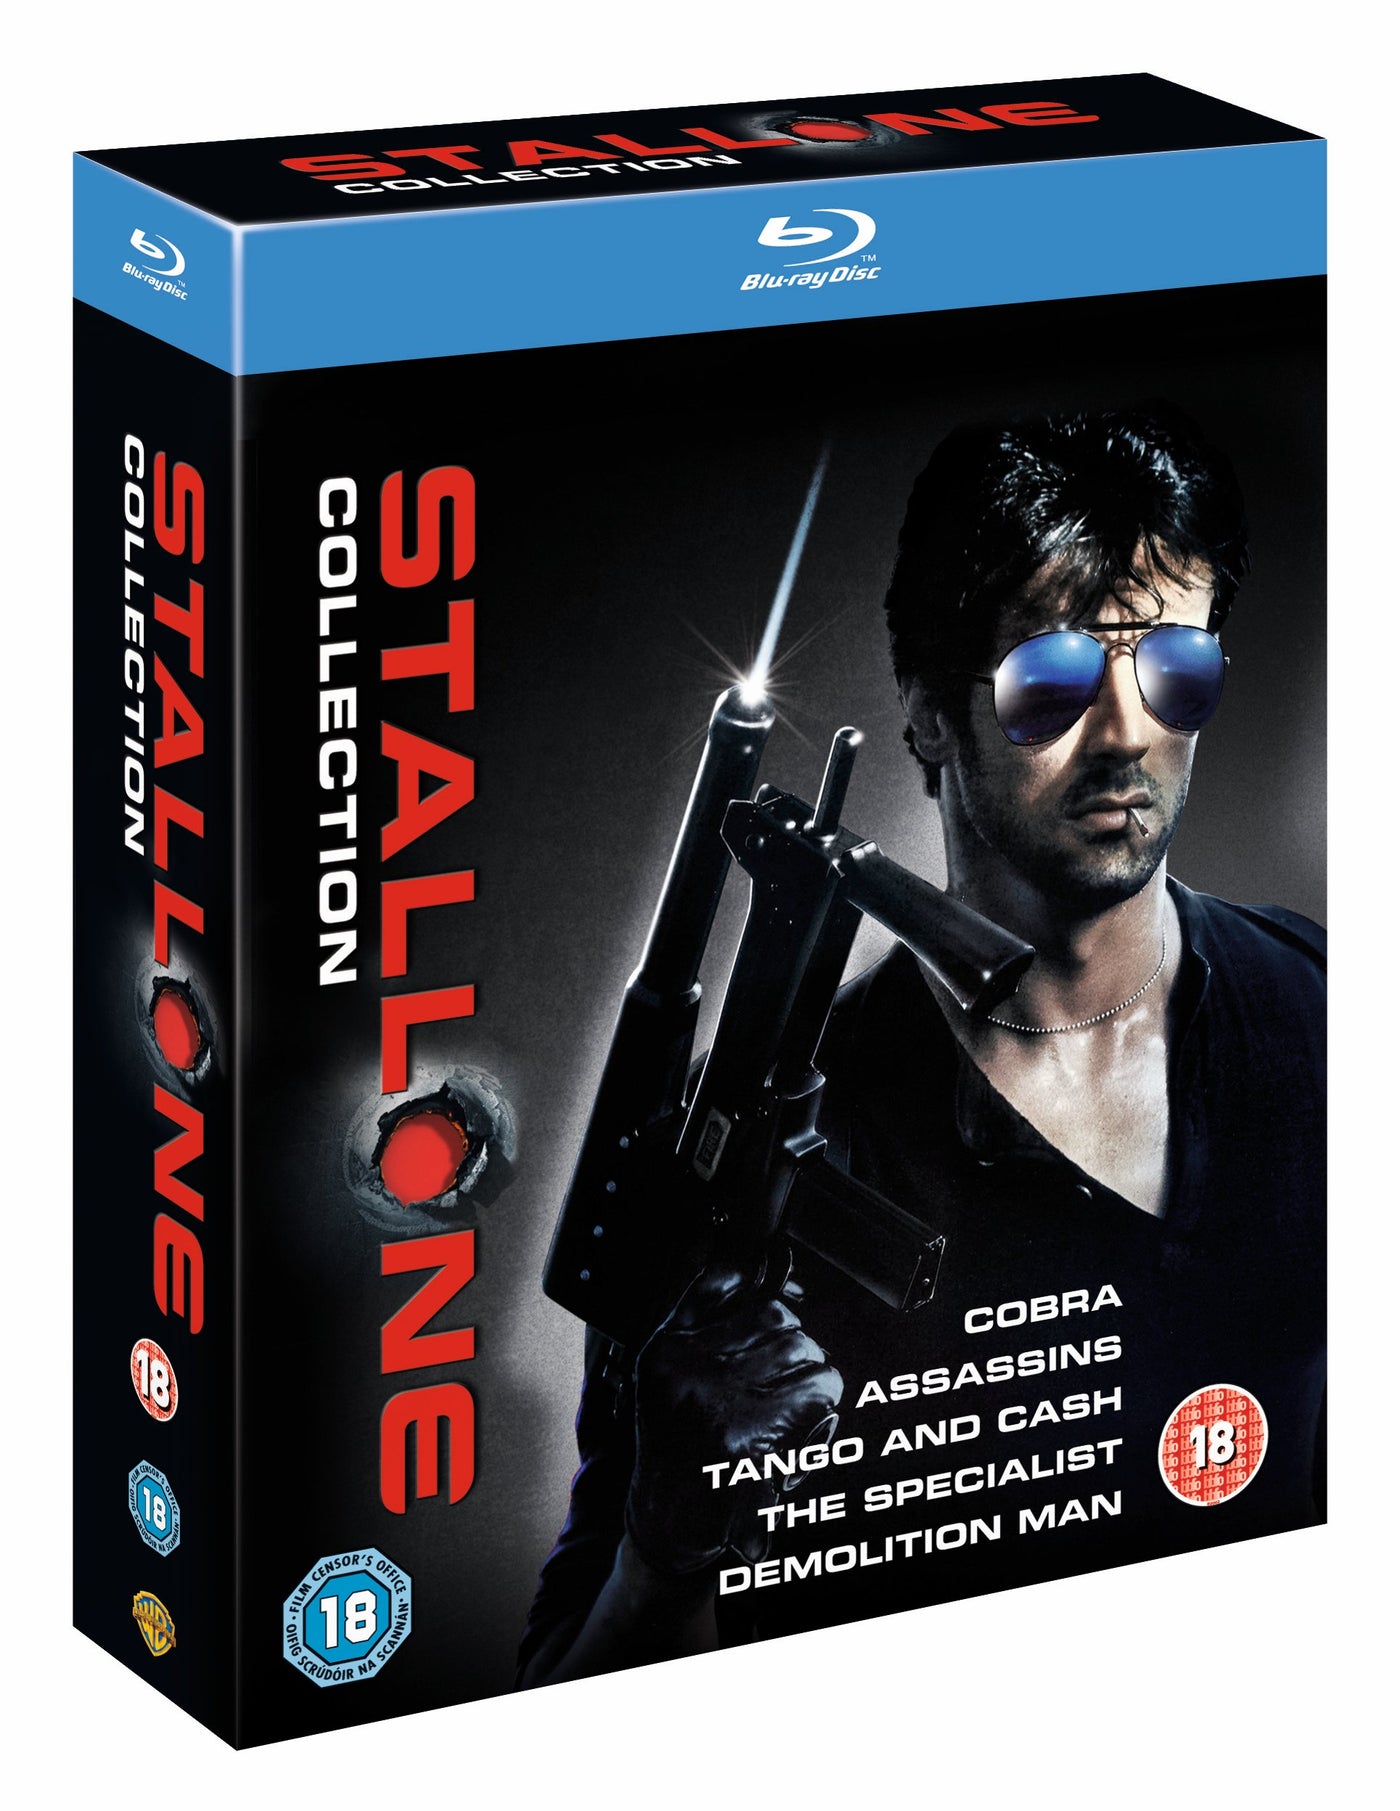 The Slyvester Stallone Collection (Blu-ray)